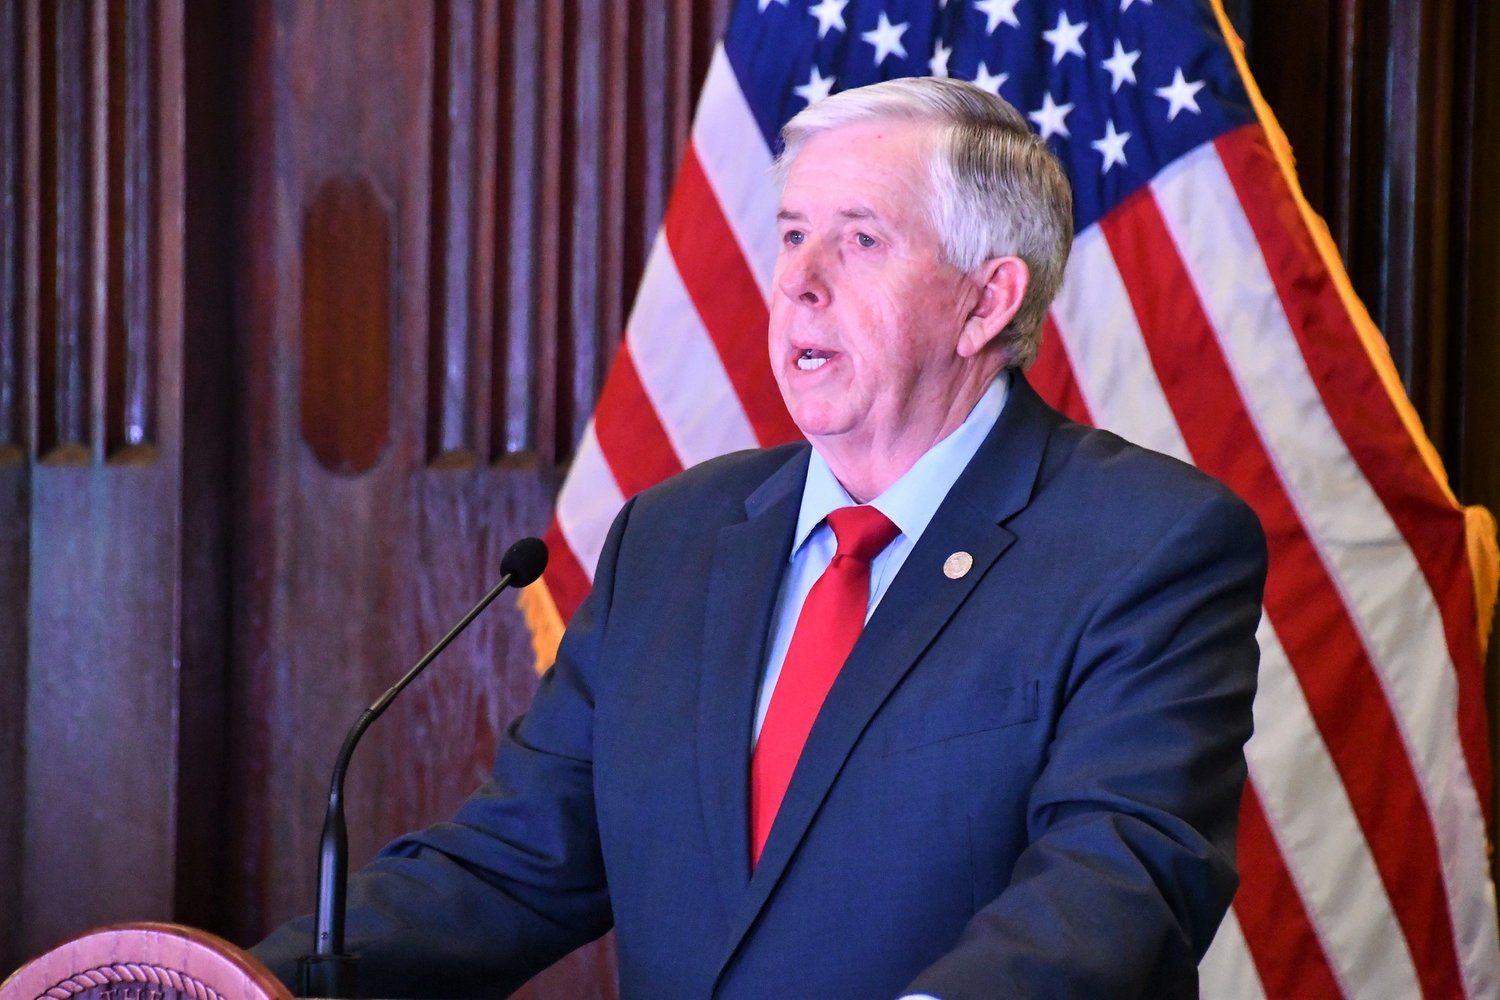 Gov. Mike Parson on Friday announces a statewide stay-at-home order.